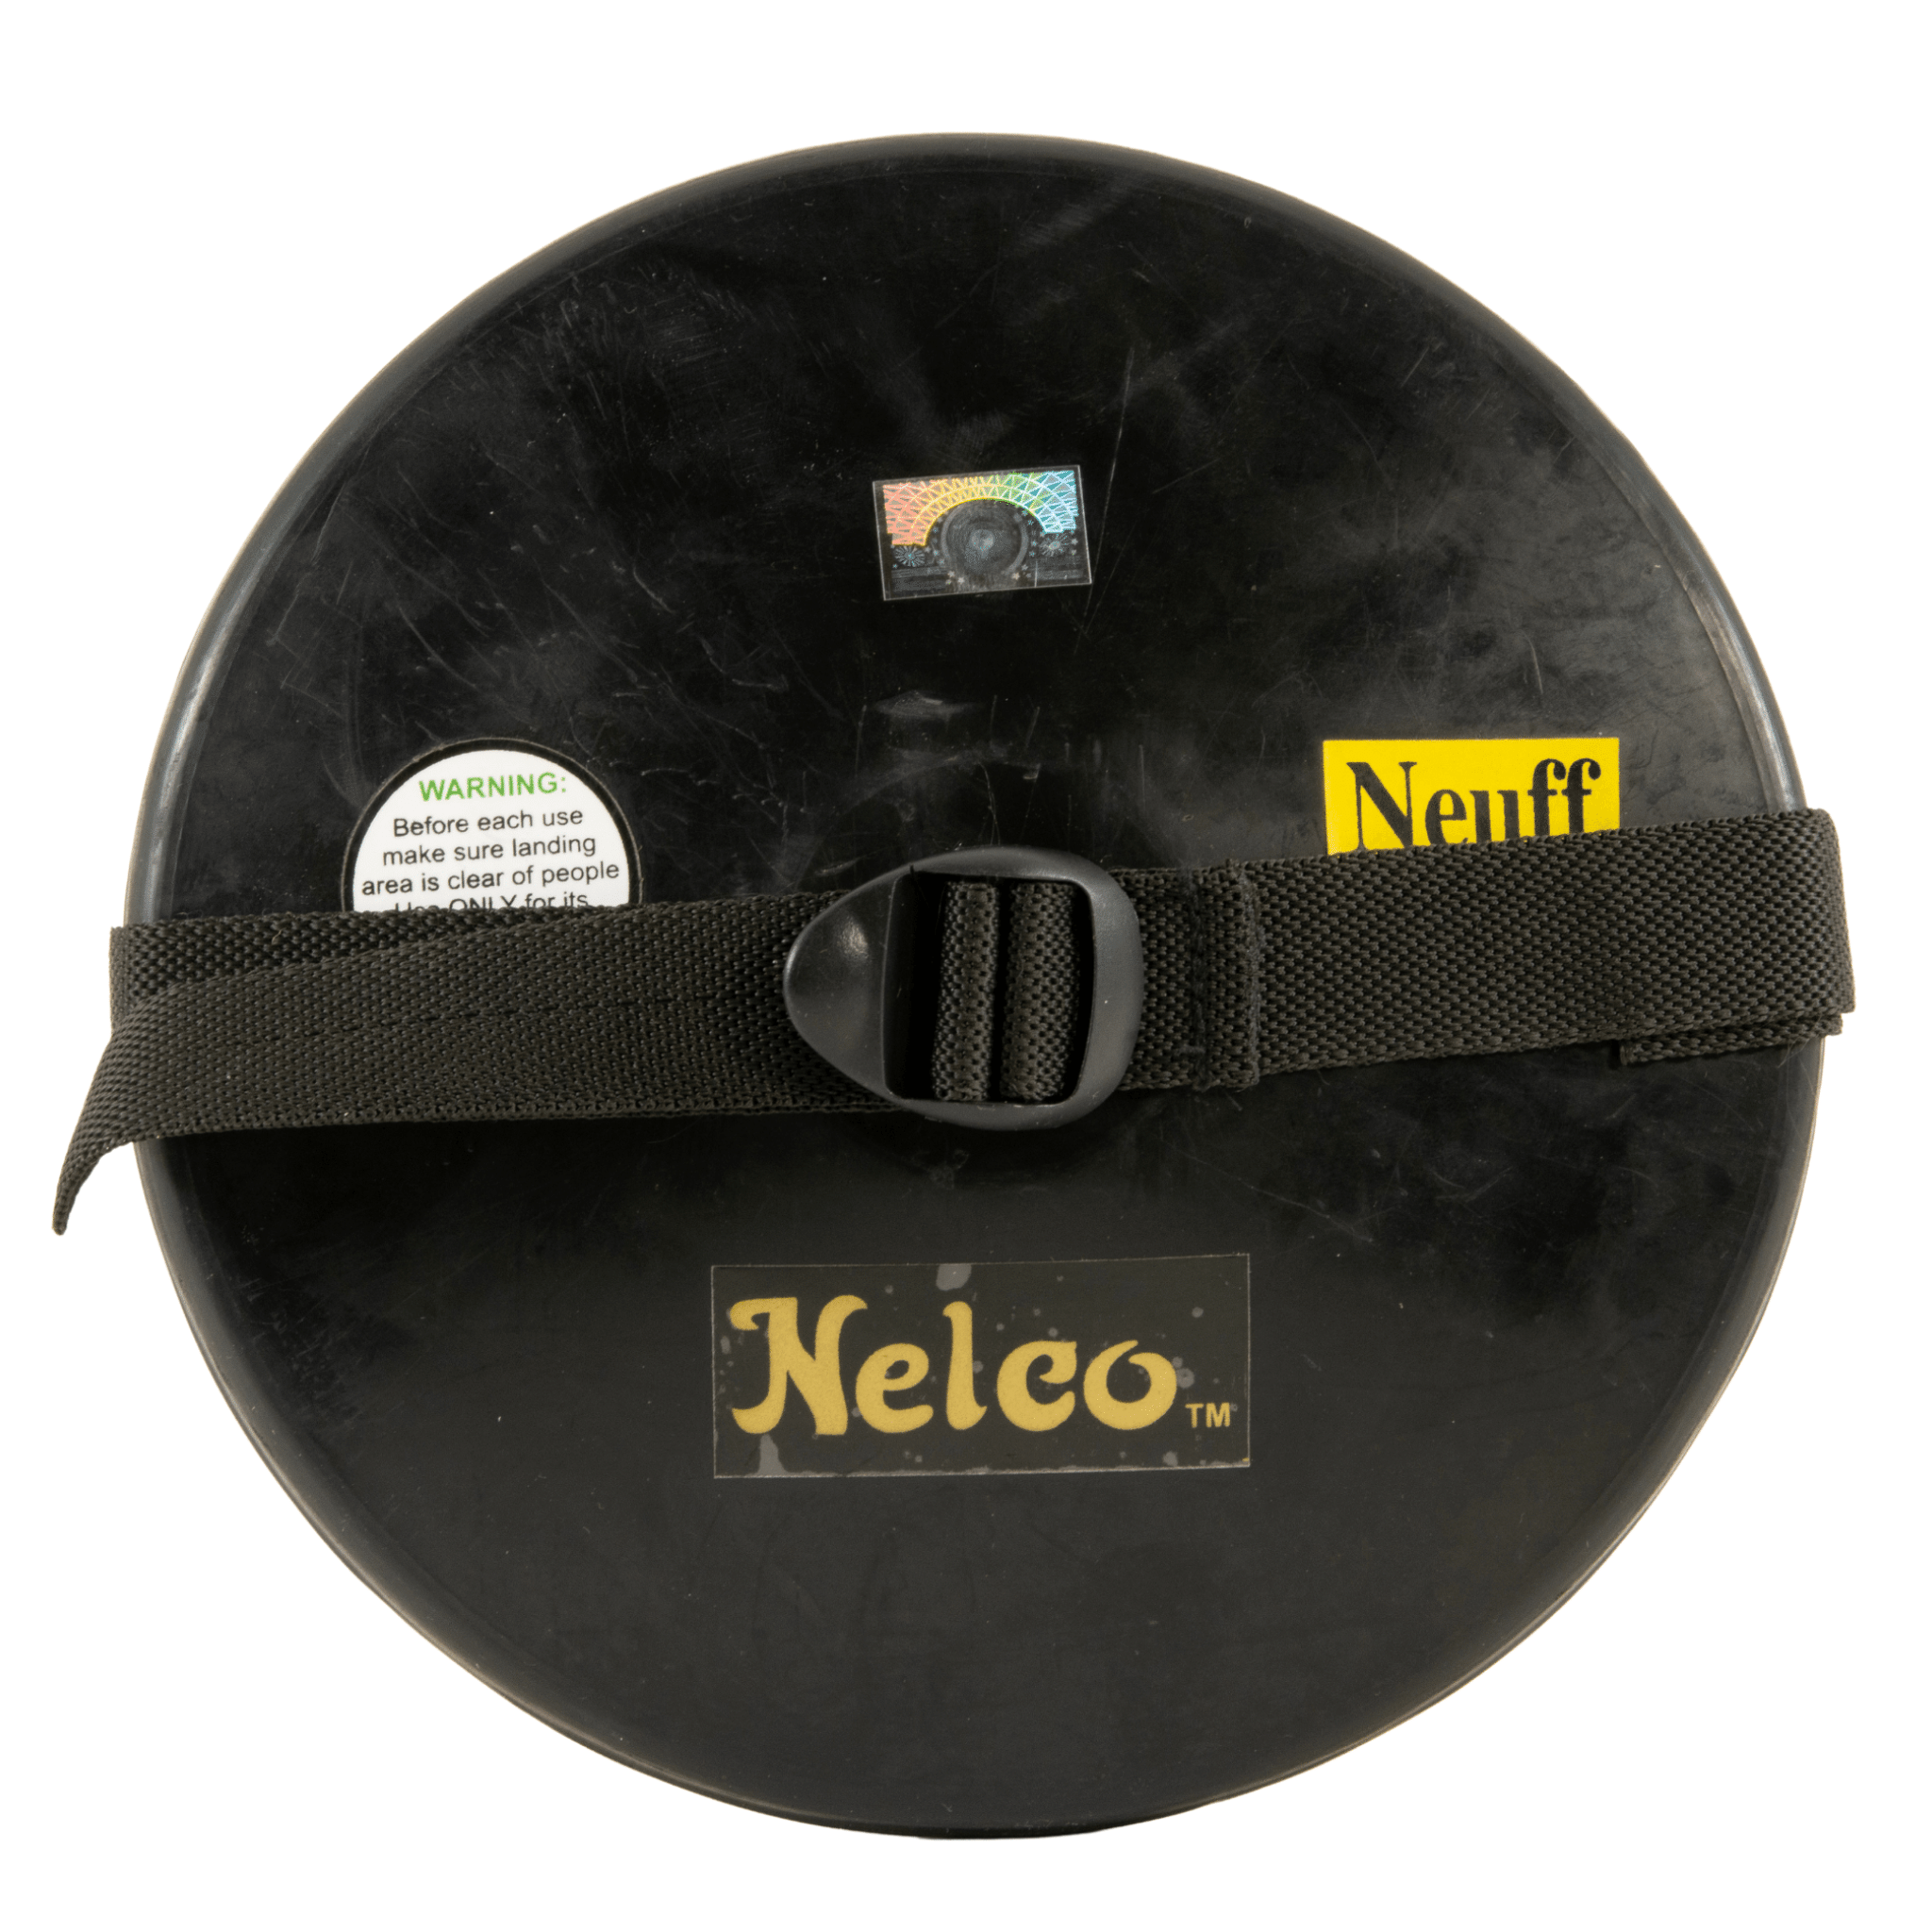 Rubber Discus with a hand strap for training drills